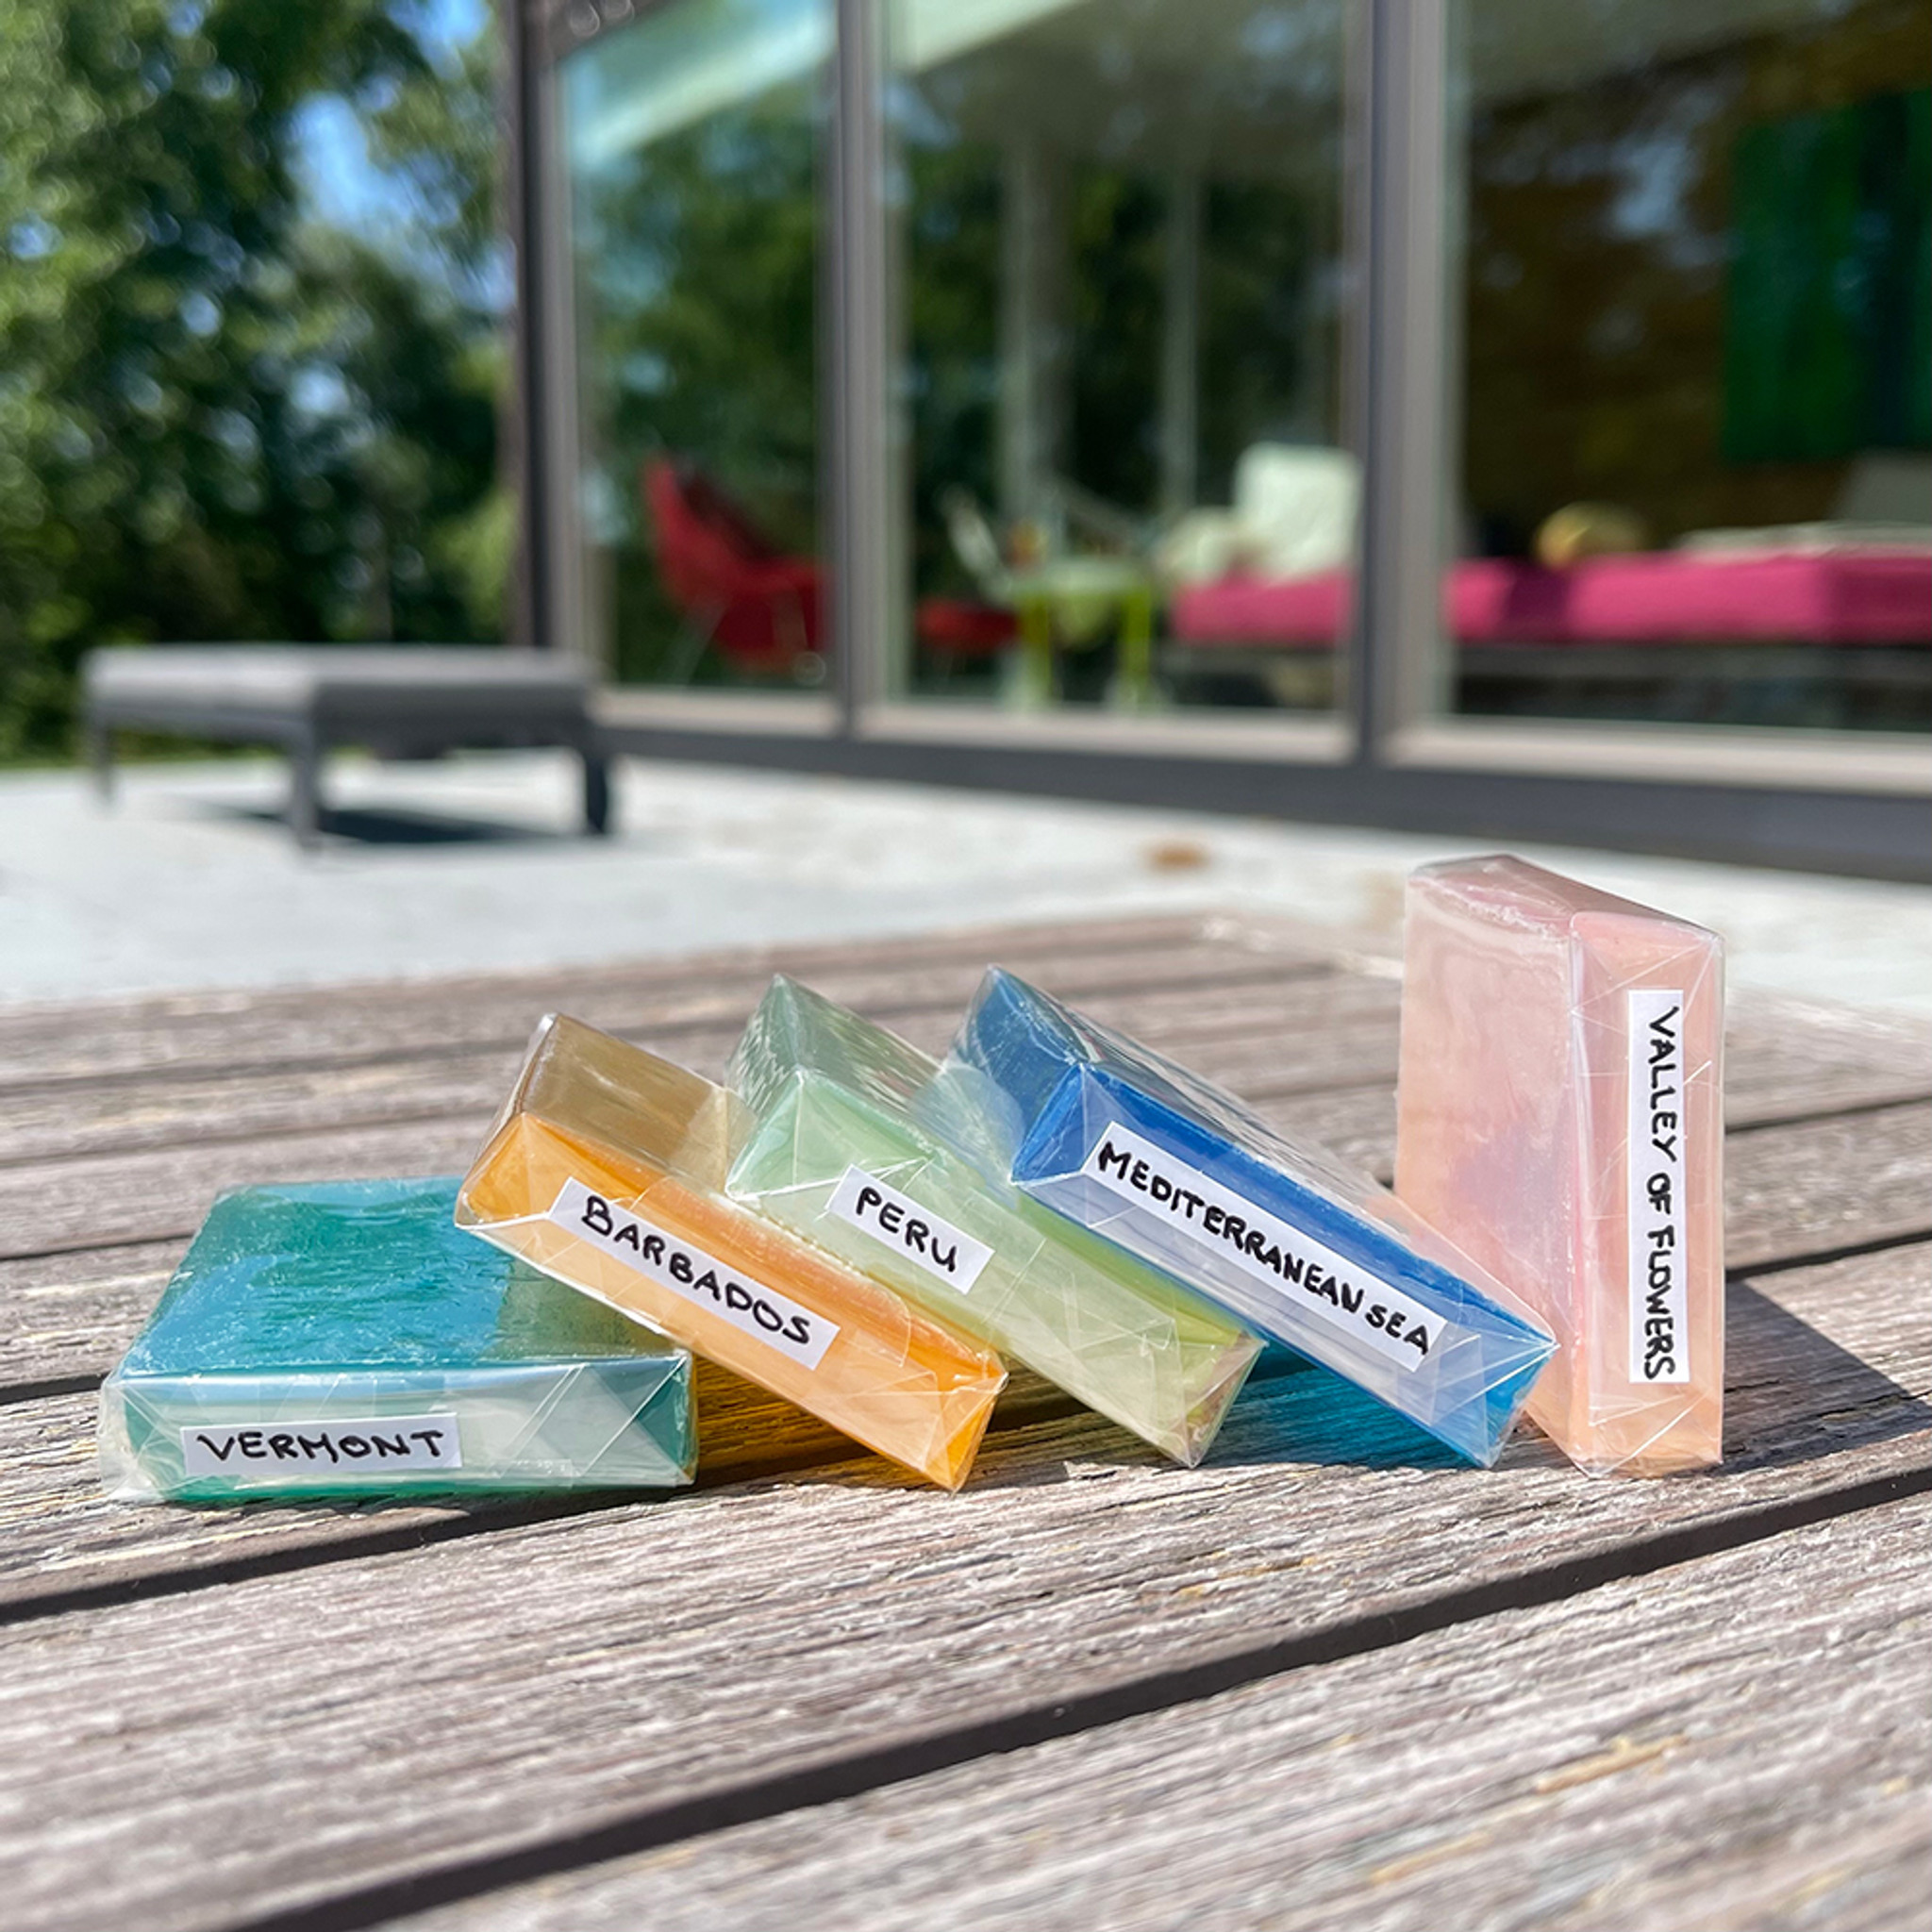 TRY IT - Travel Pack of 5 - Choose any 5 soaps!